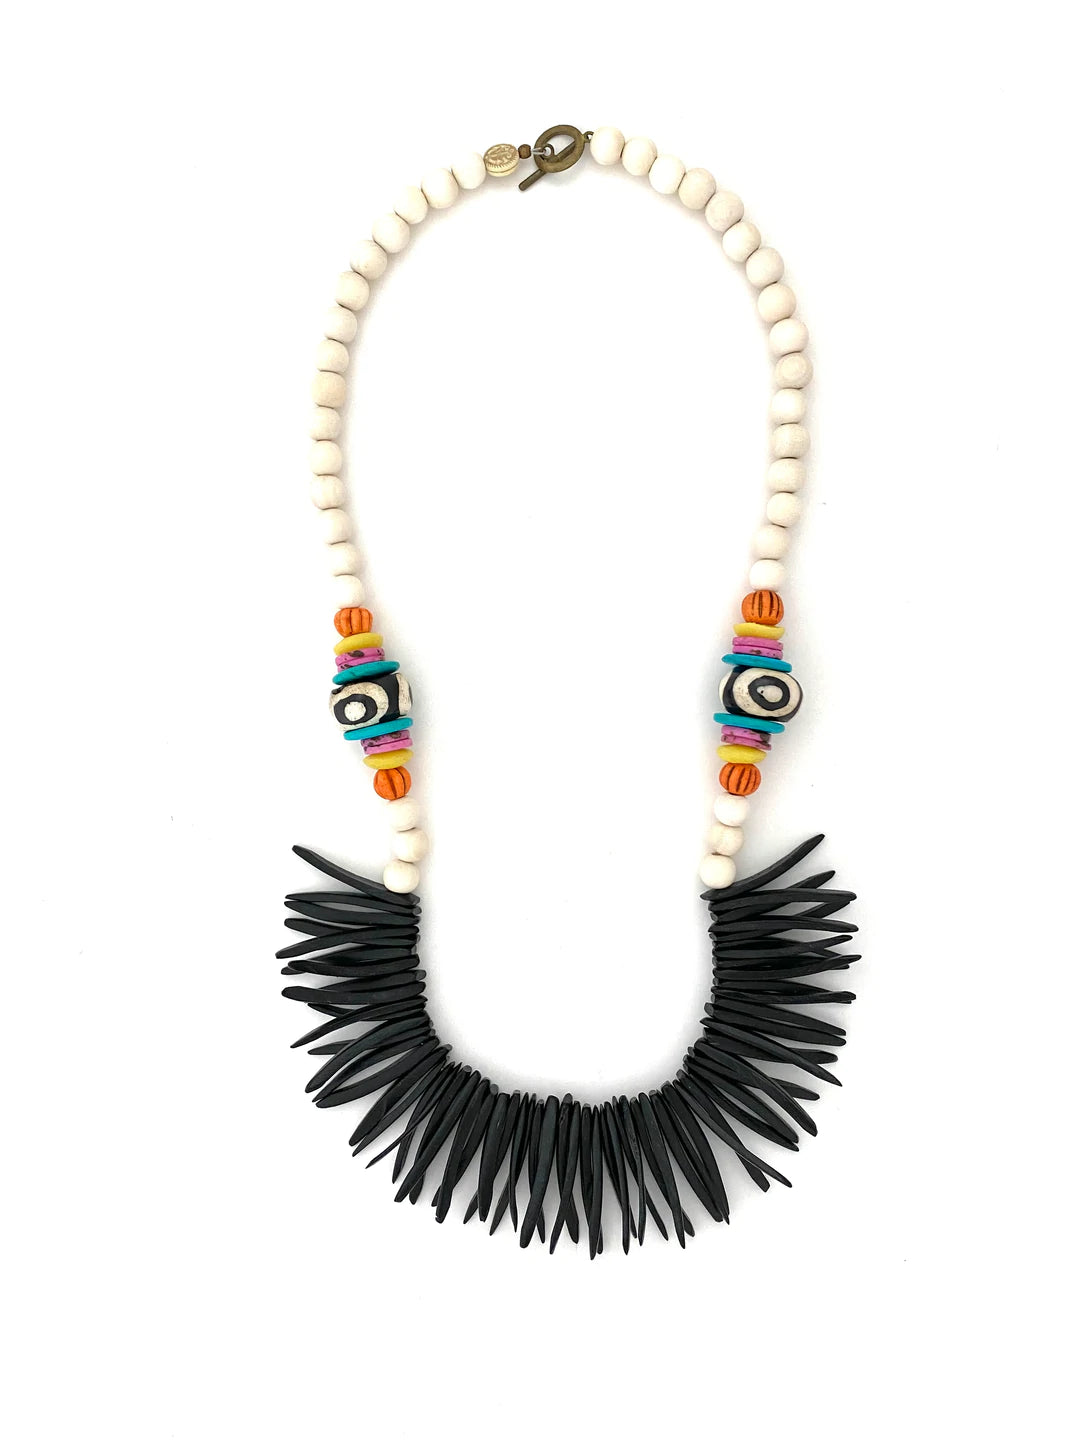 COCONUT WOOD NECKLACE - MIDNIGHT PARTY